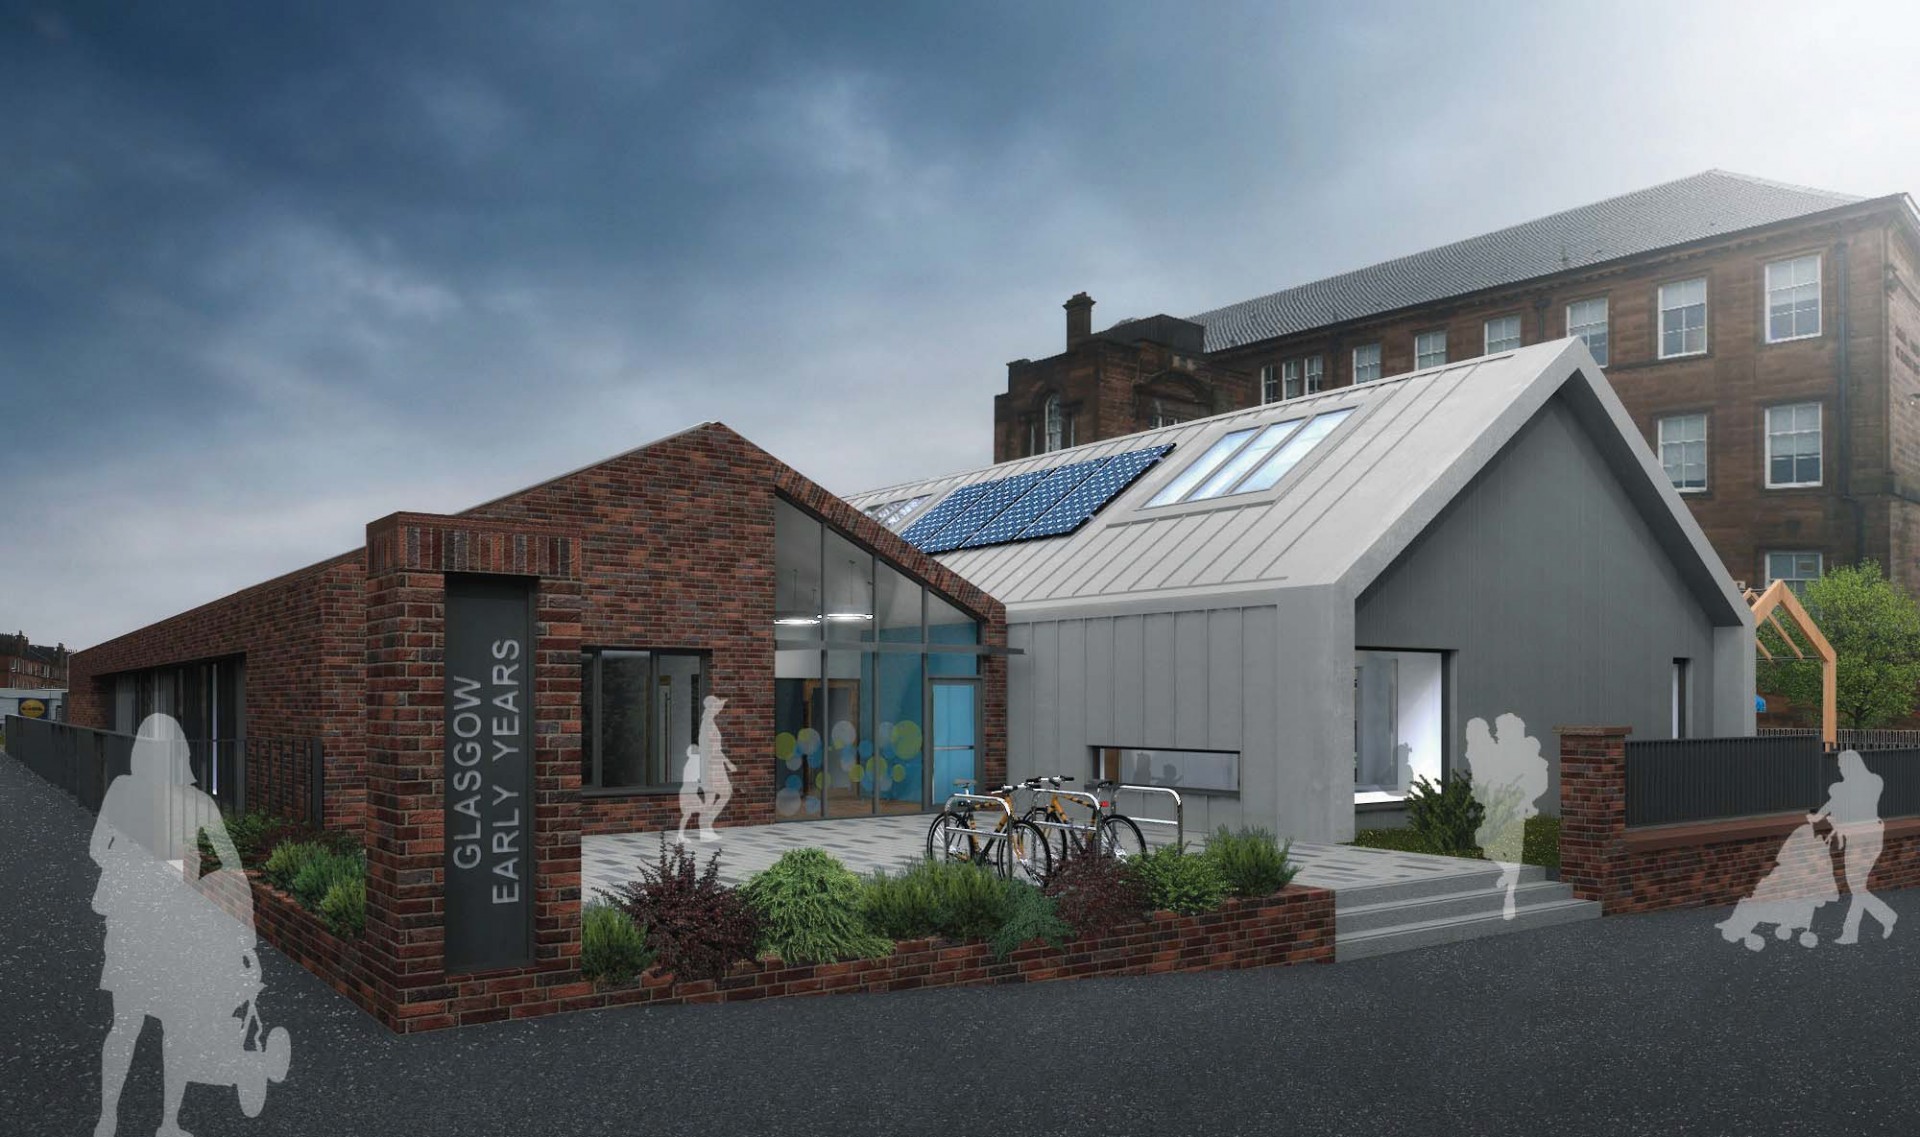 Govanhill early learning and childcare facility approved